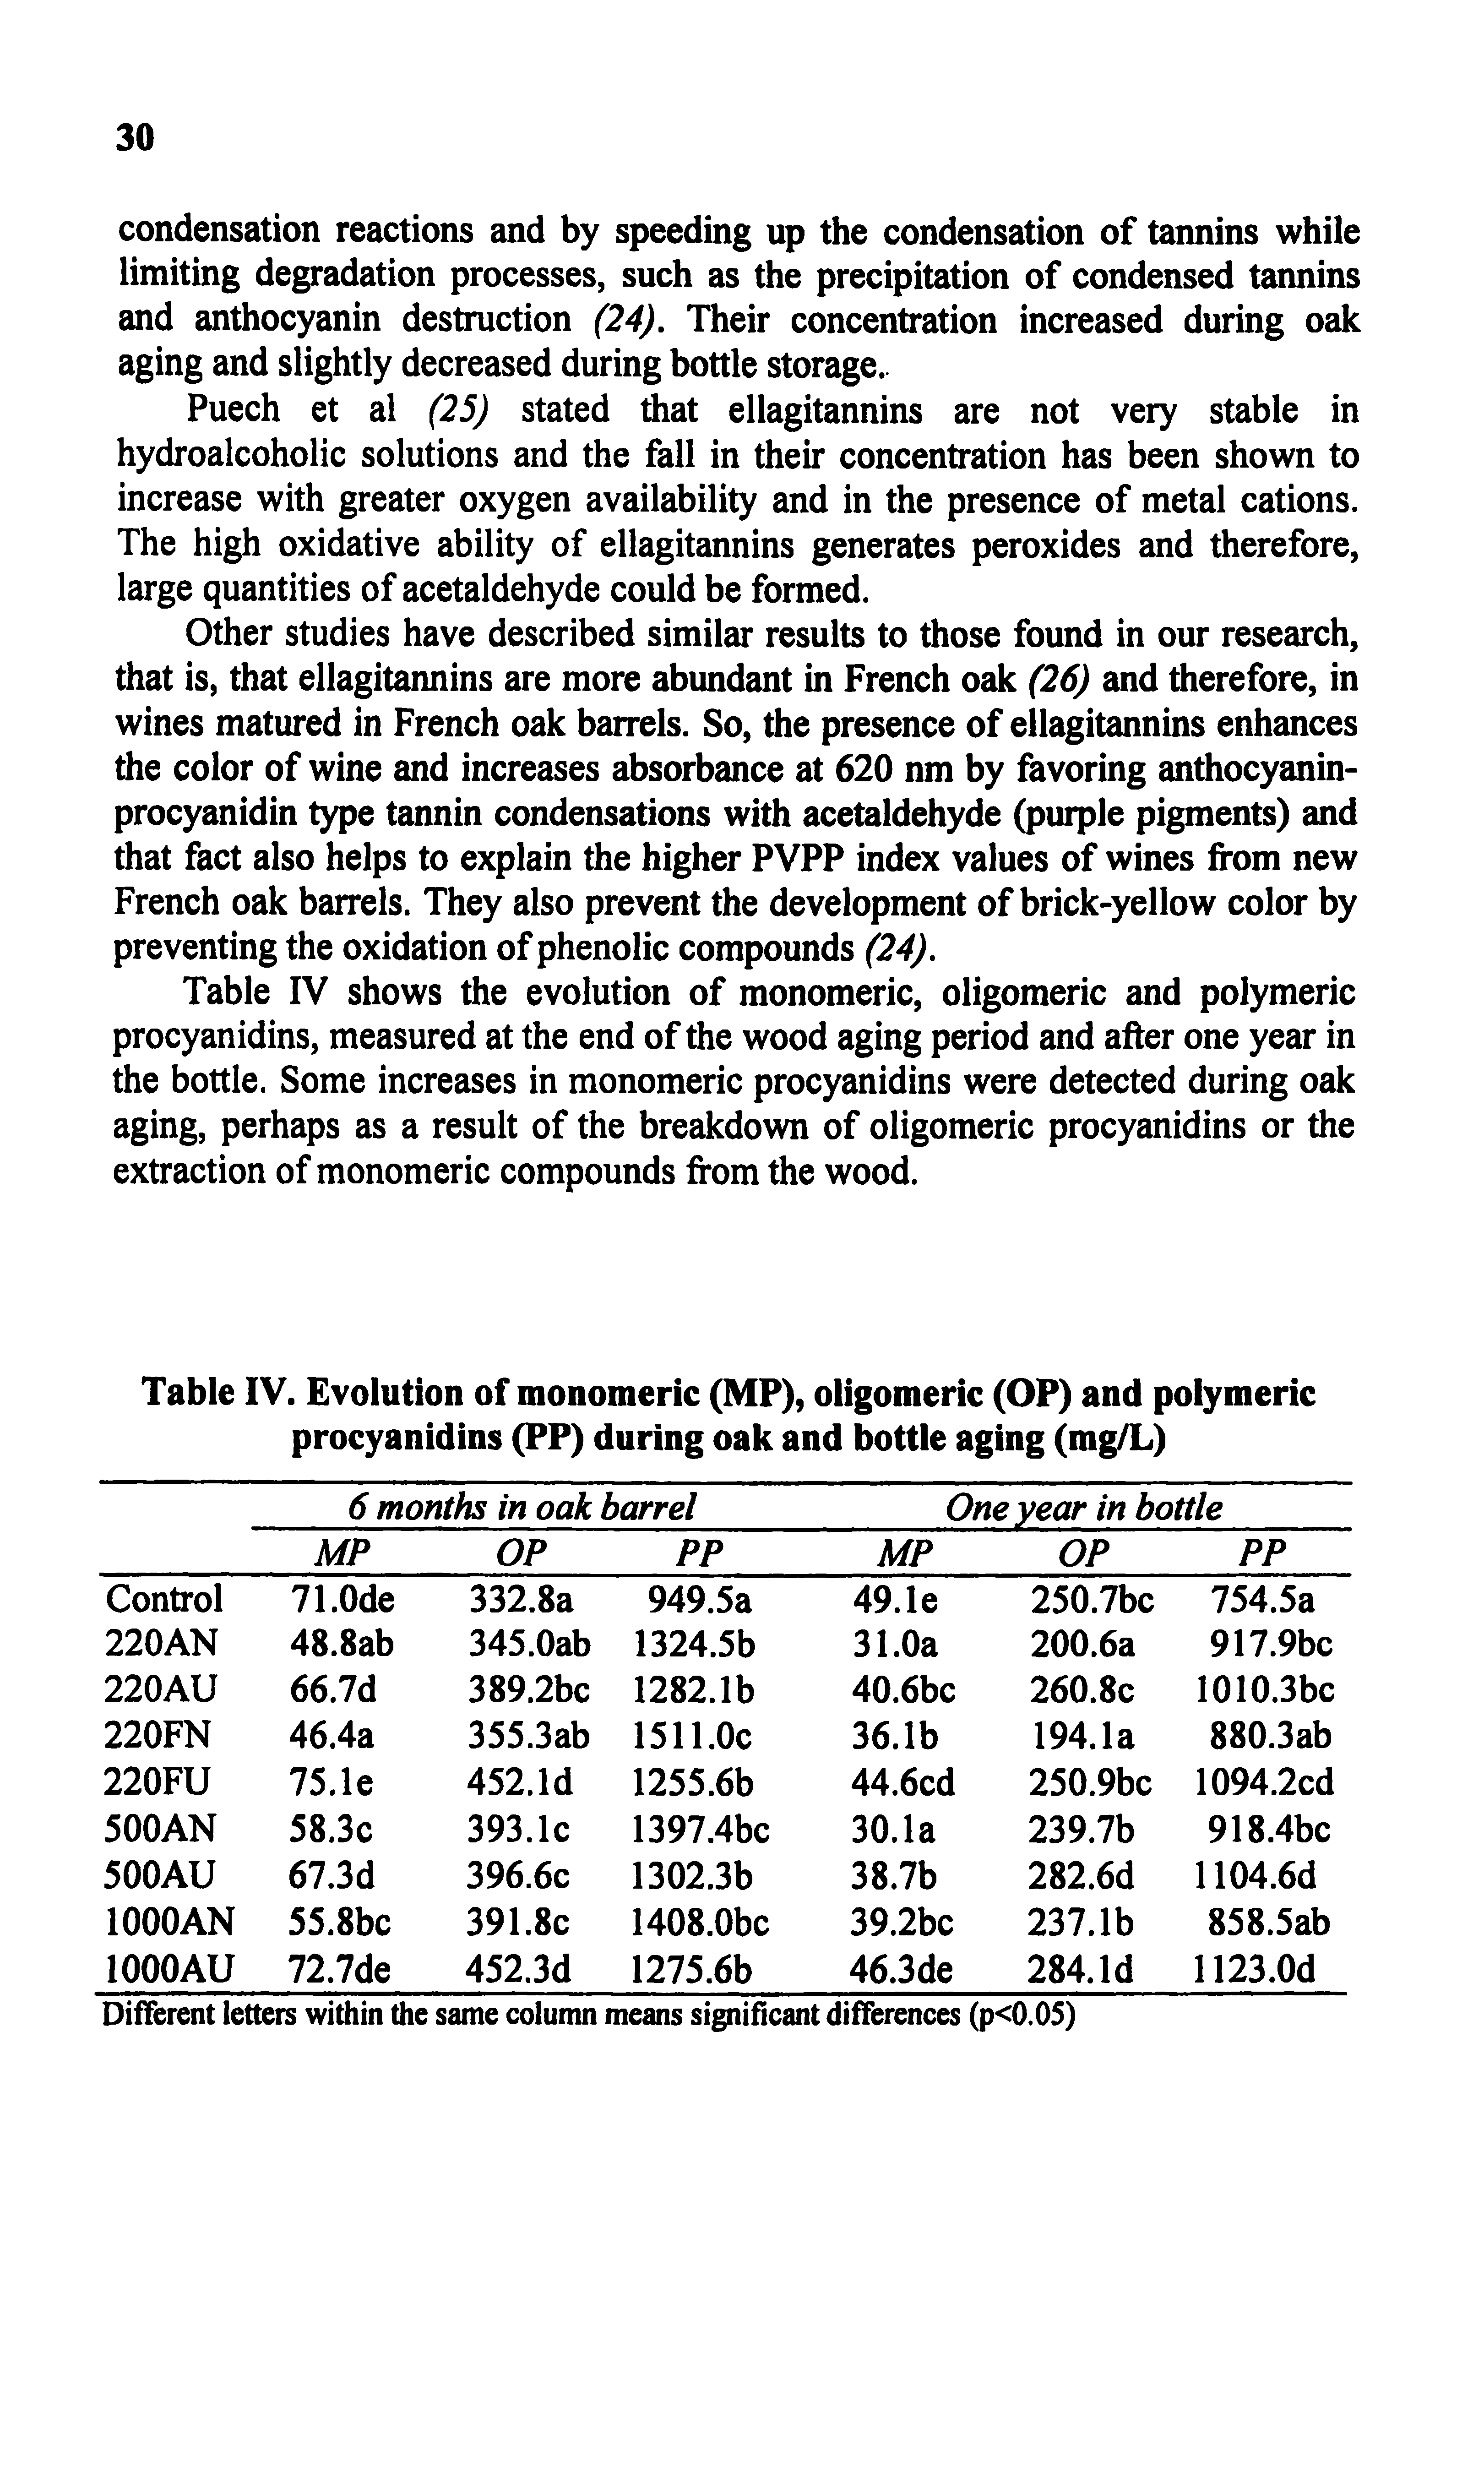 Table IV. Evolution of monomeric (MP), oligomeric (OP) and polymeric procyanidins (PP) during oak and bottle aging (mg/L)...